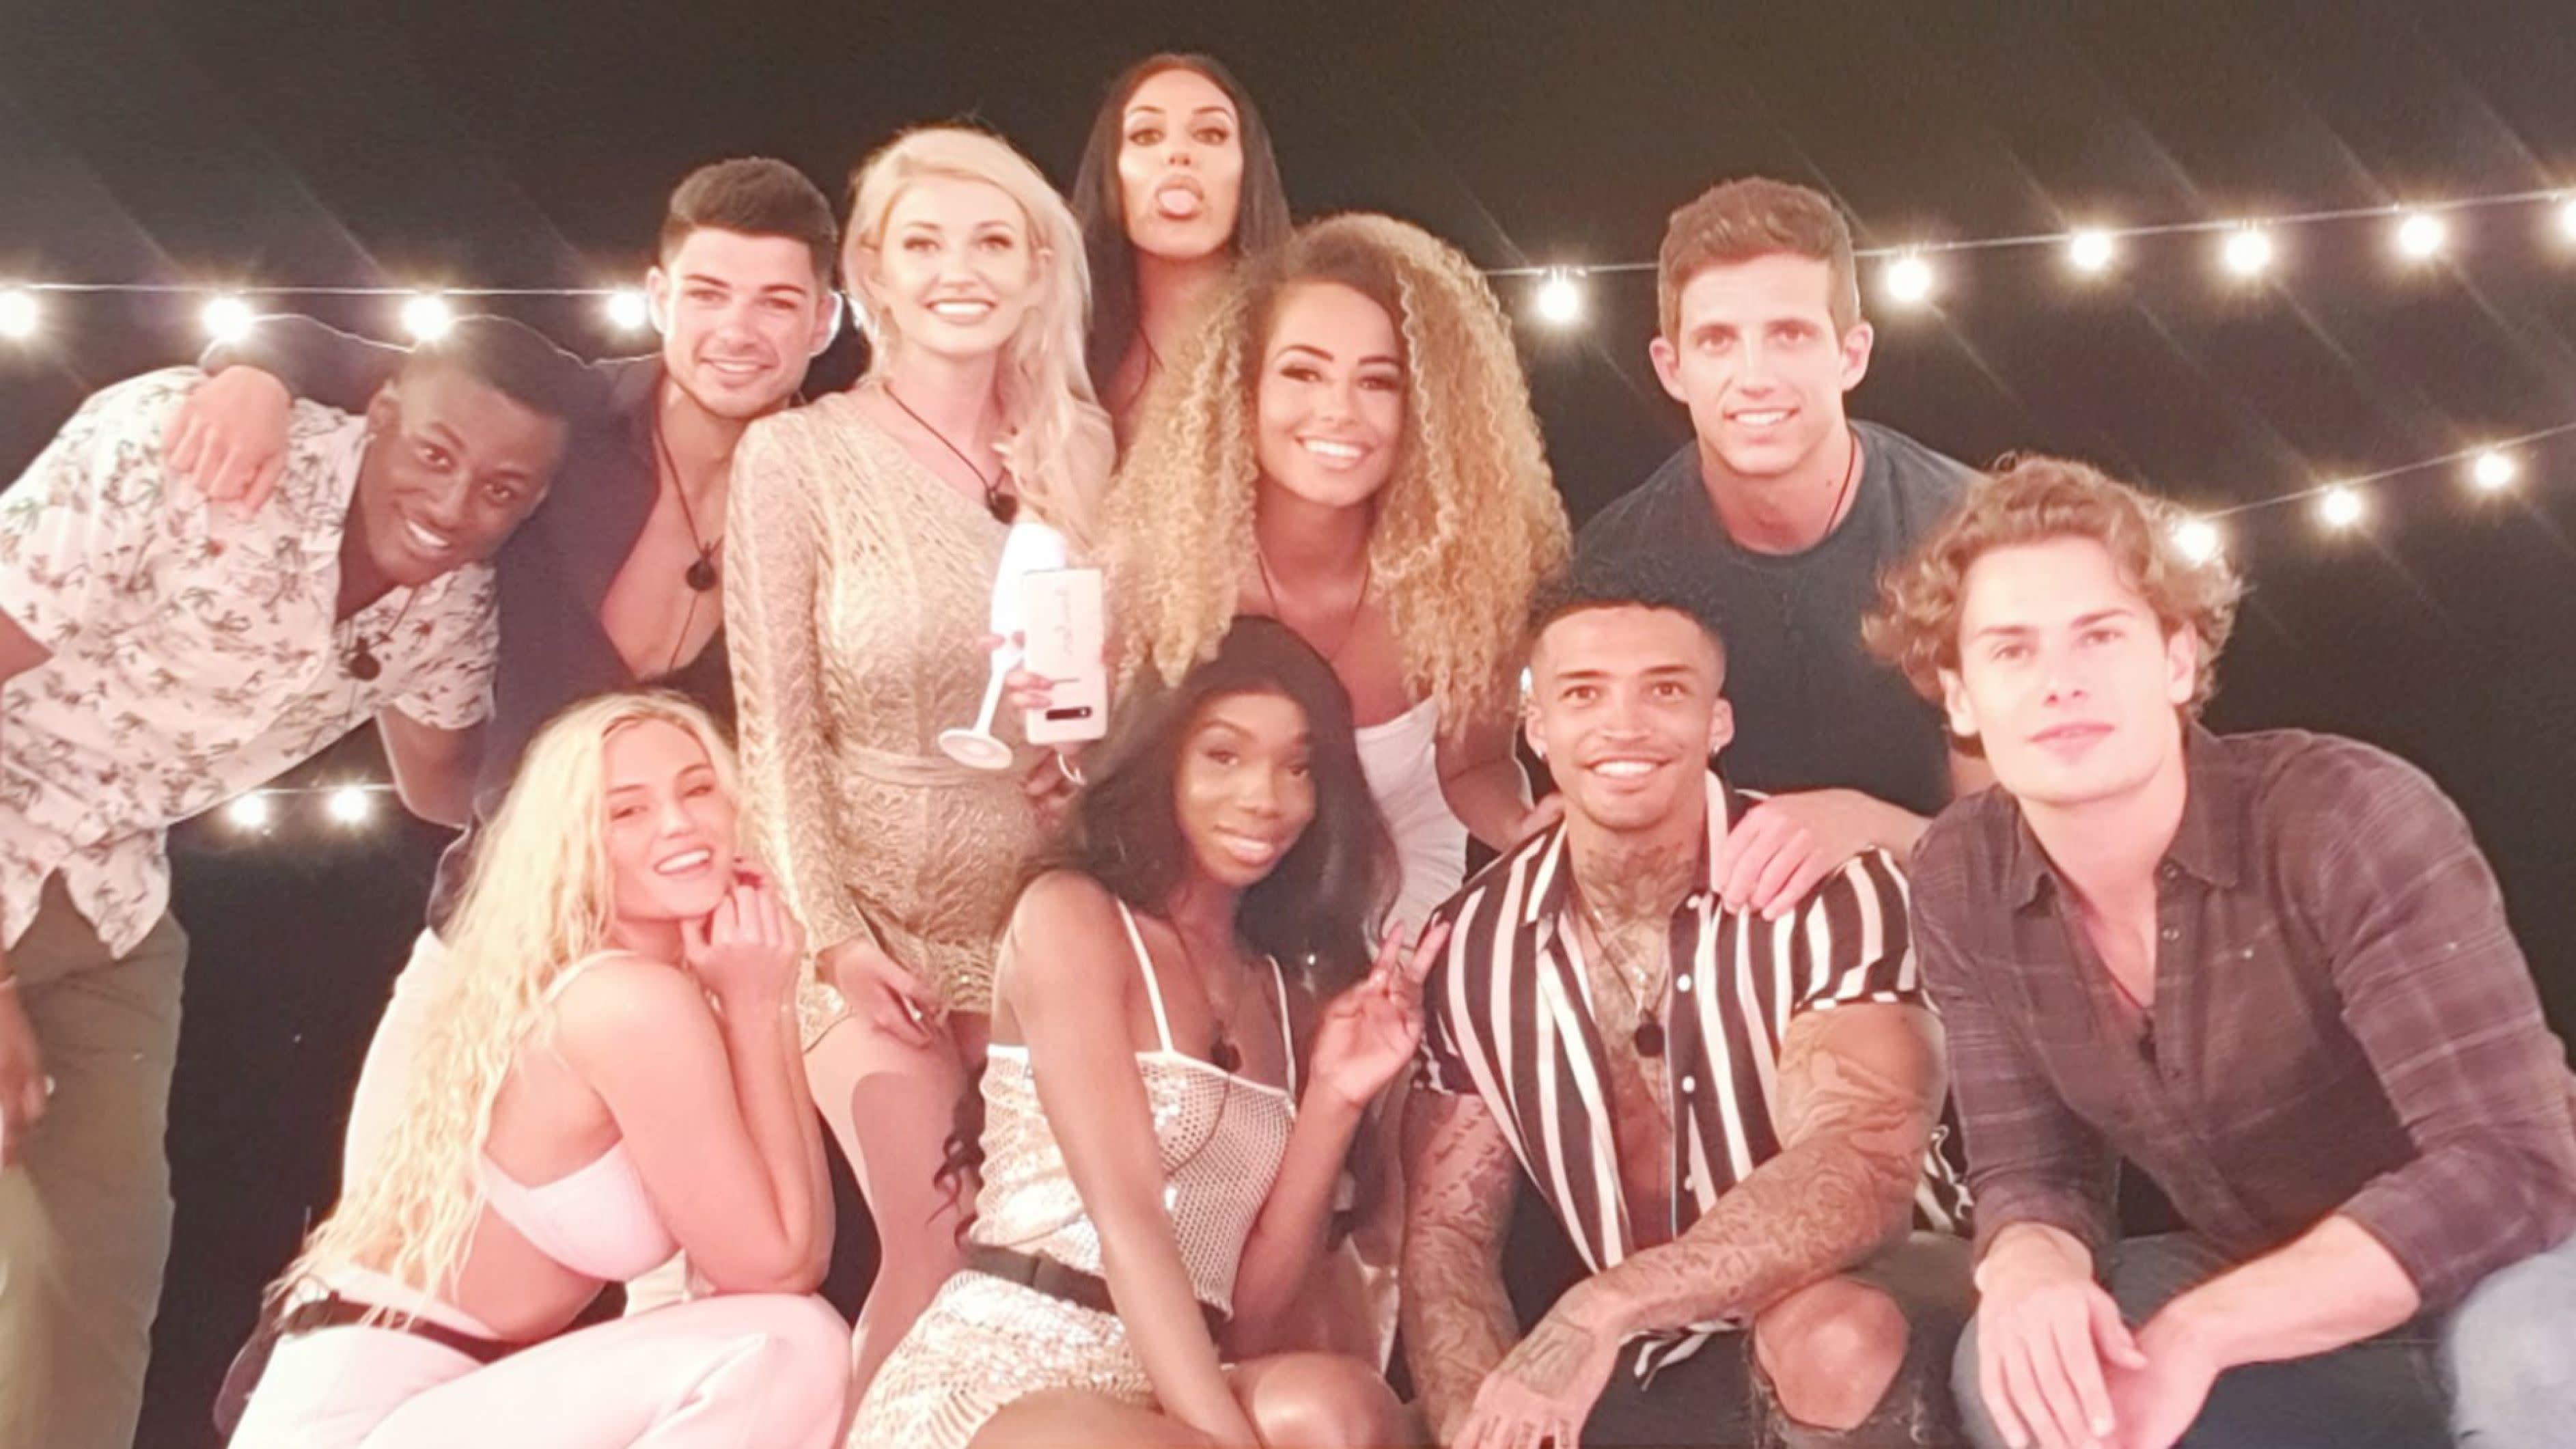 ‘Love Island’ Scores Highest Ever Opening On UK’s ITV2 With 3.3M Viewers